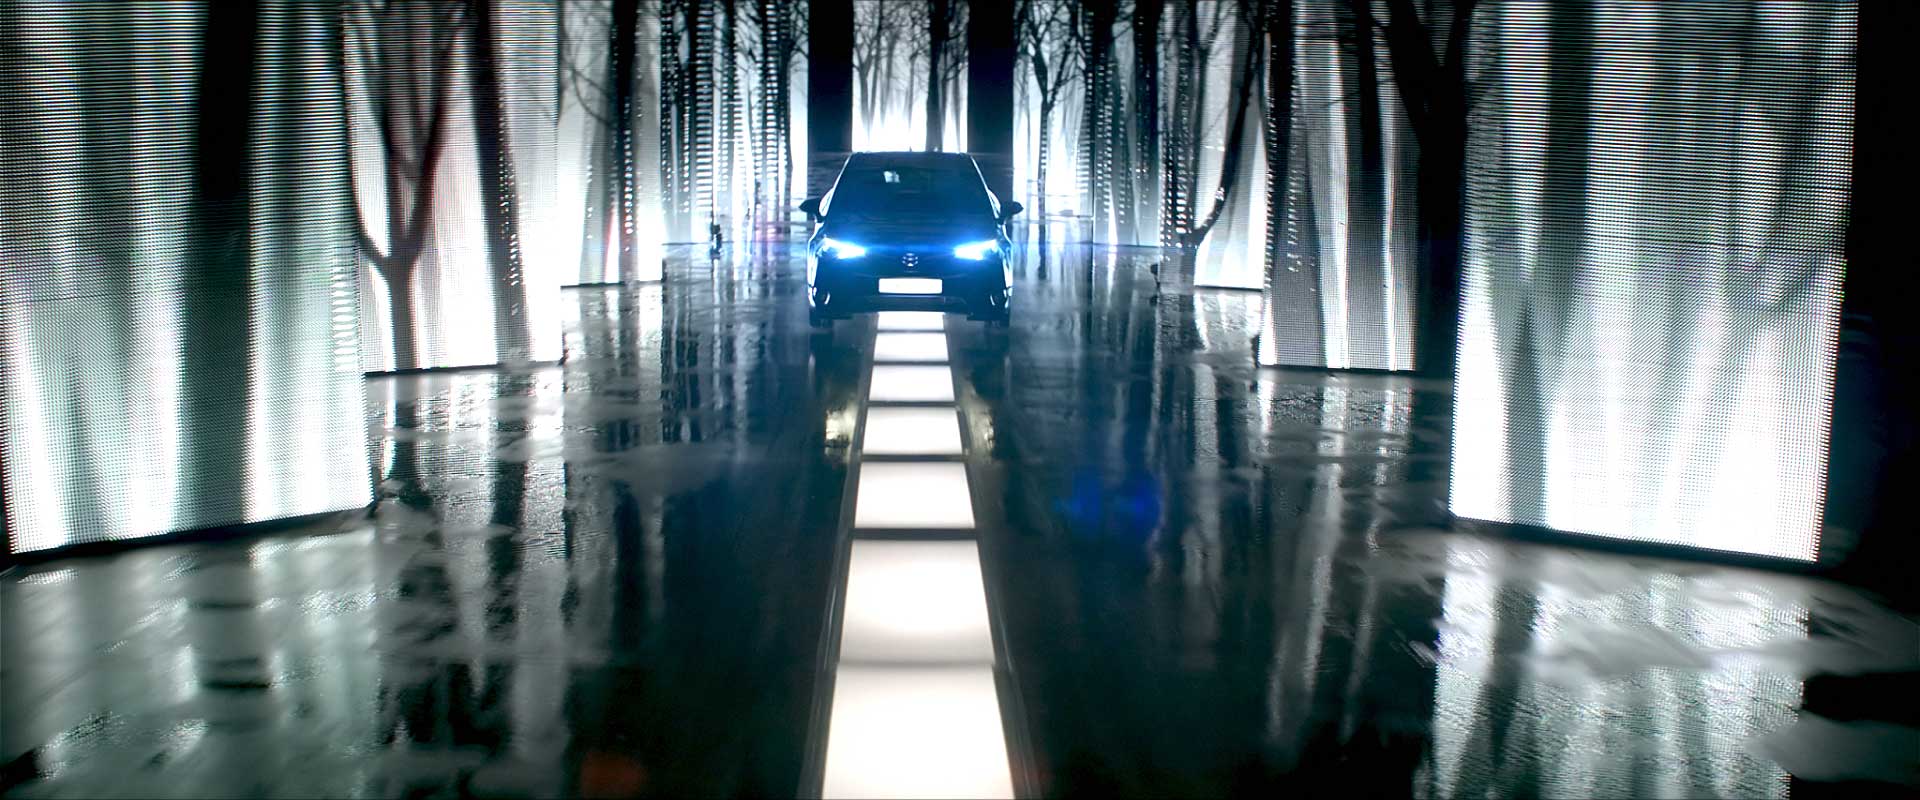 Car on artificial road. Still from Toyota Avensis - Commercial